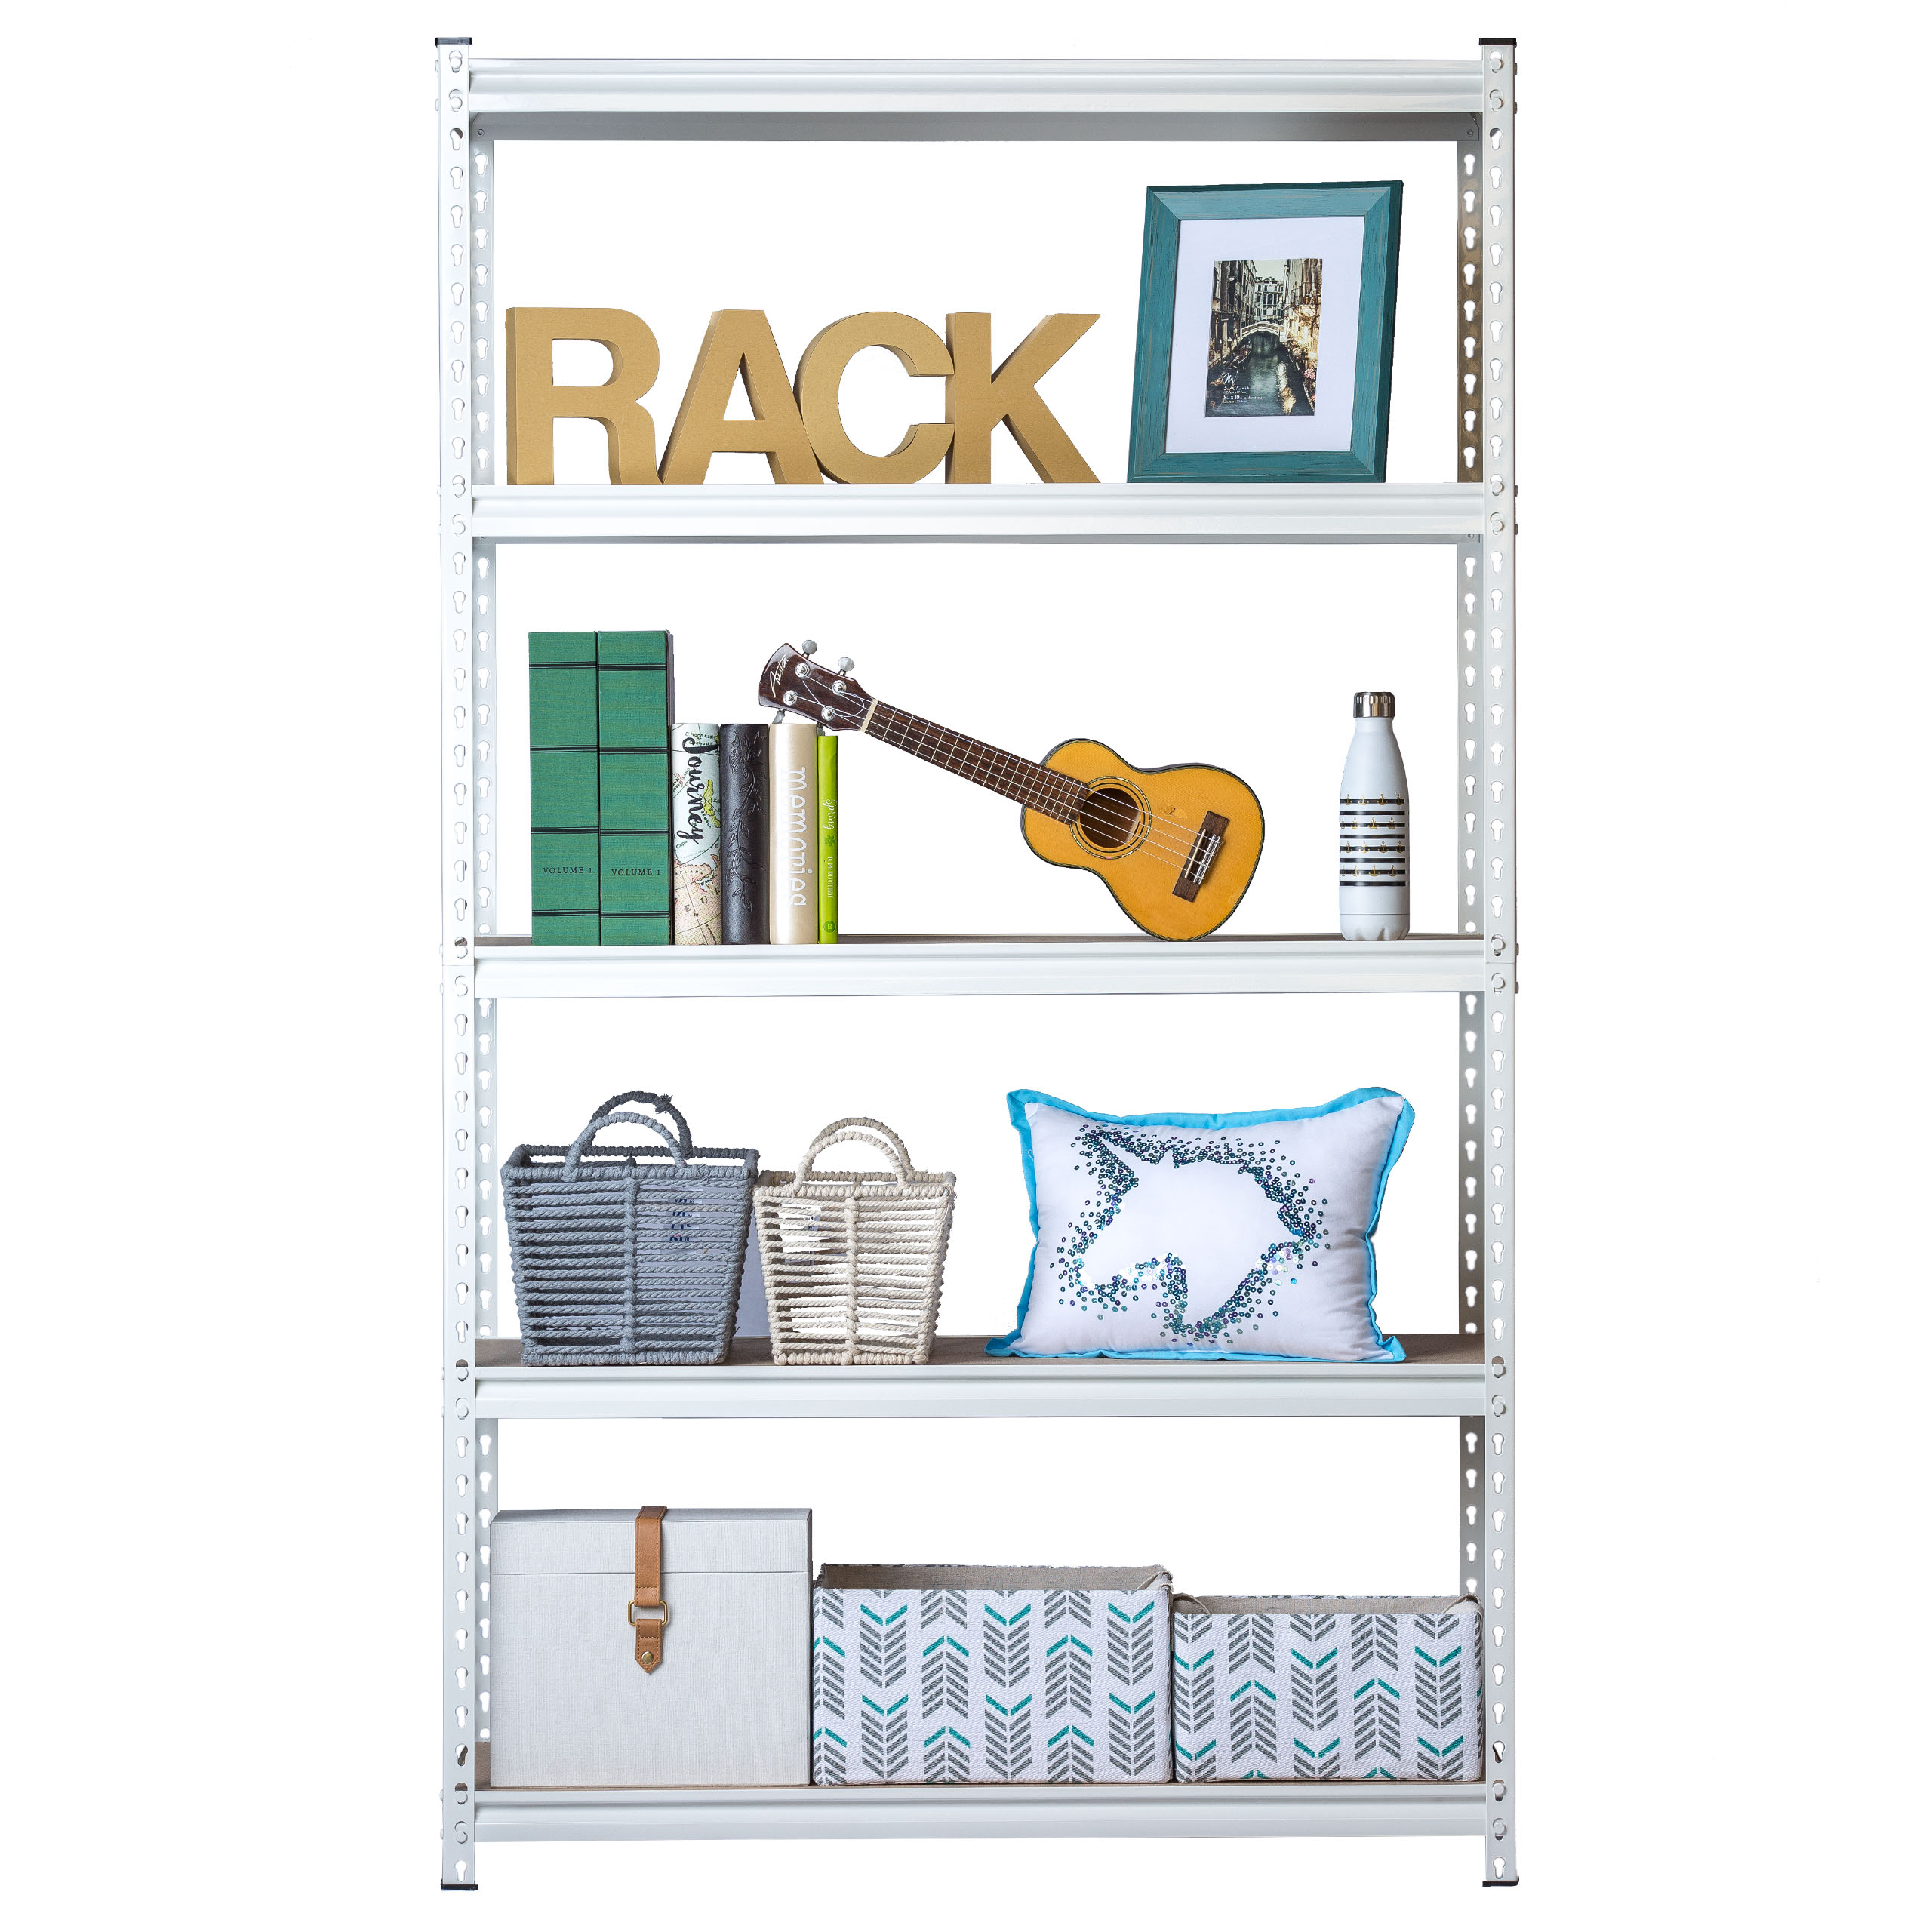 KING'S RACK Storage Bin Rack System Steel Heavy Duty 8-Tier Utility Shelving  Unit (34-in W x 16-in D x 65-in H), Gray in the Freestanding Shelving Units  department at